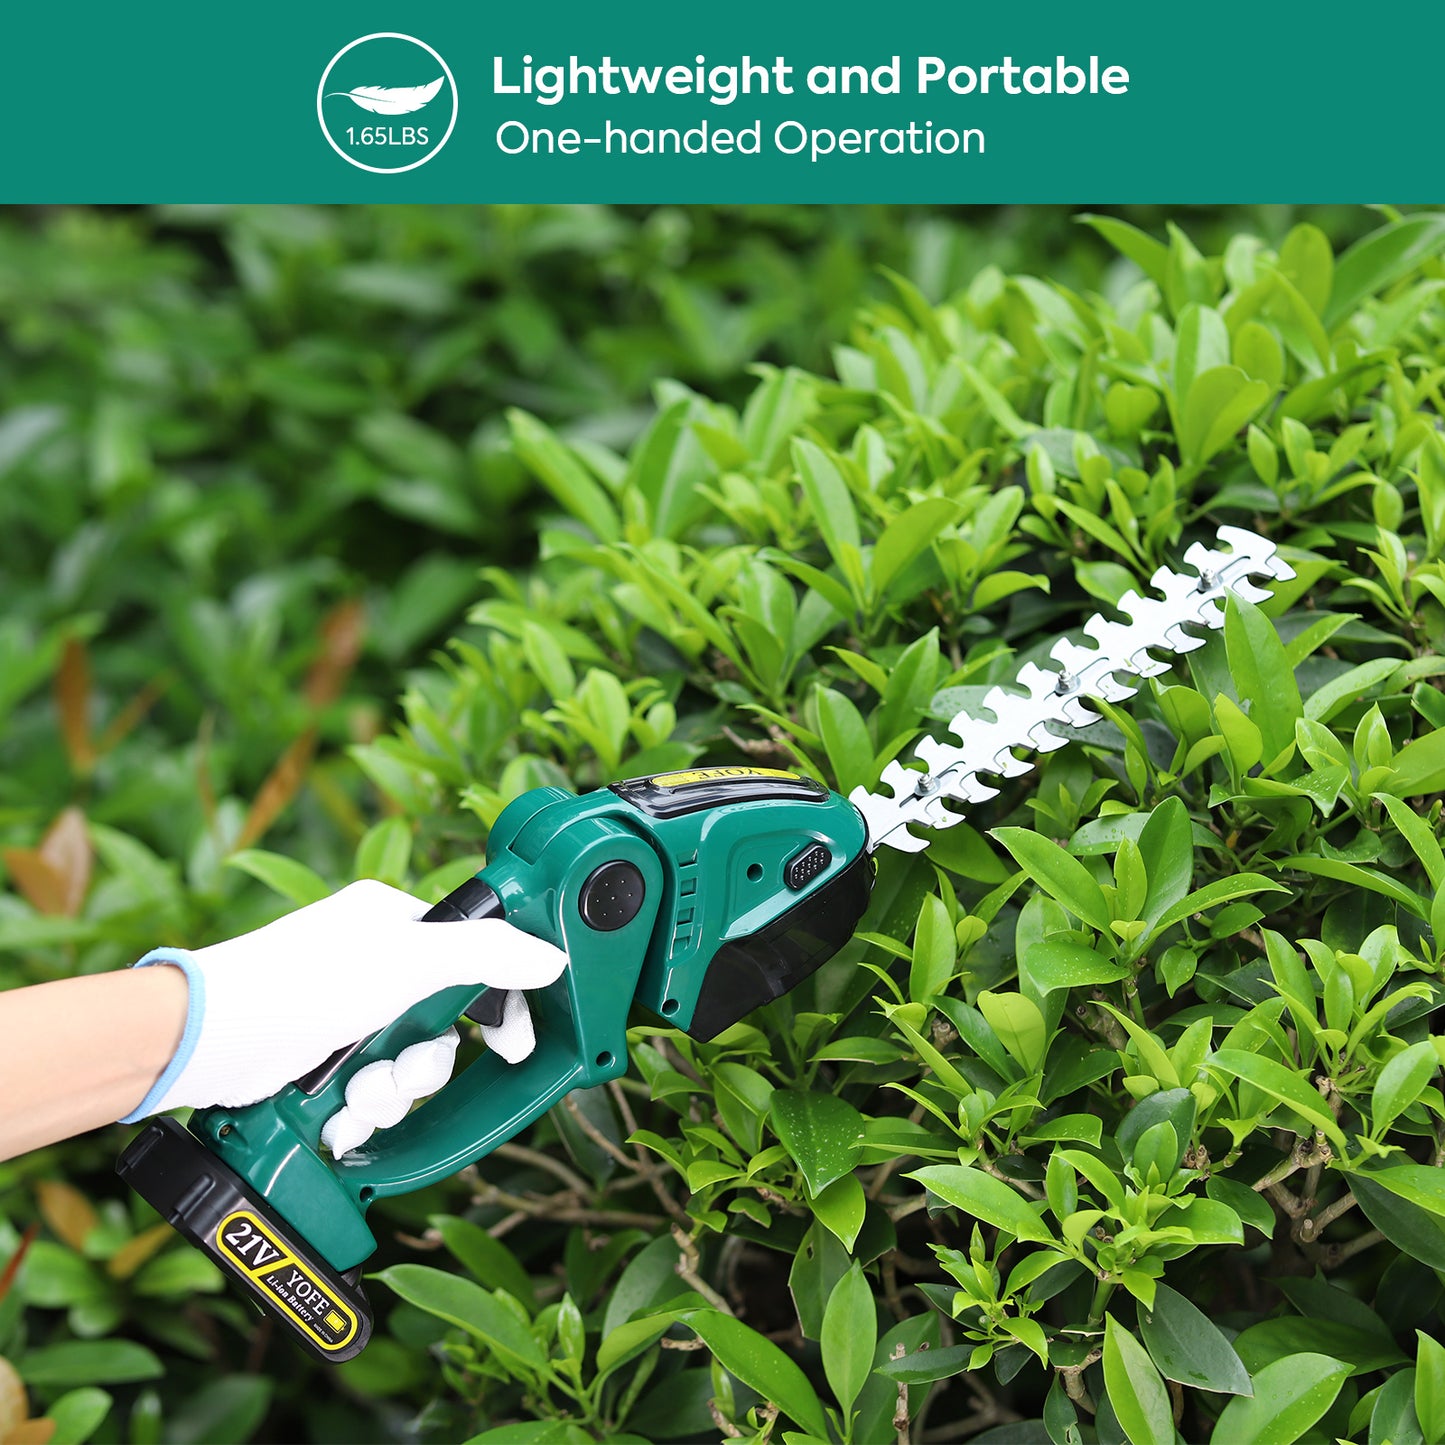 SYNGAR Electric Cordless Hedge Trimmer 2 in 1, Power Grass Shear Handheld Shrubbery Trimmer with Rechargeable Battery and Charger, 1.65lbs Lightweight, Green